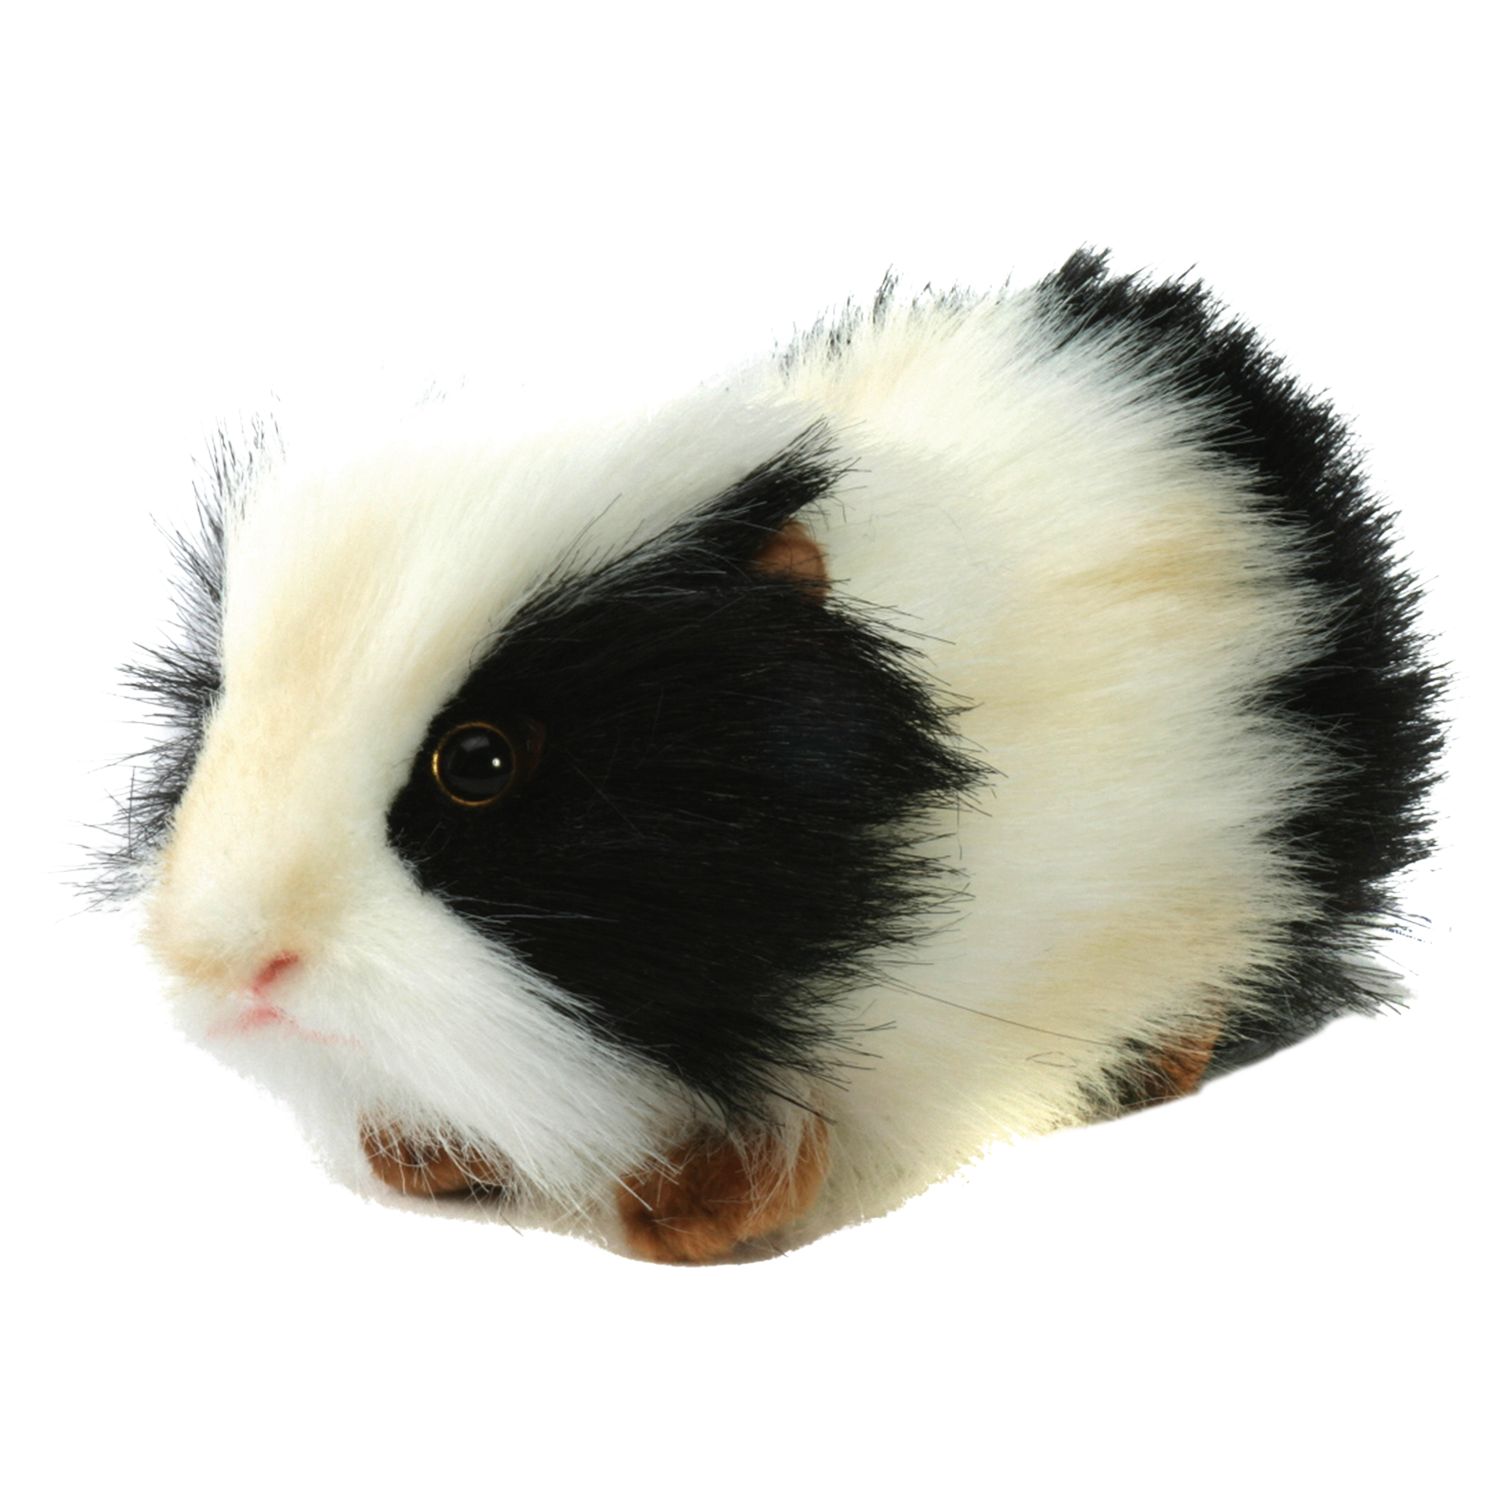 cuddly toy guinea pig